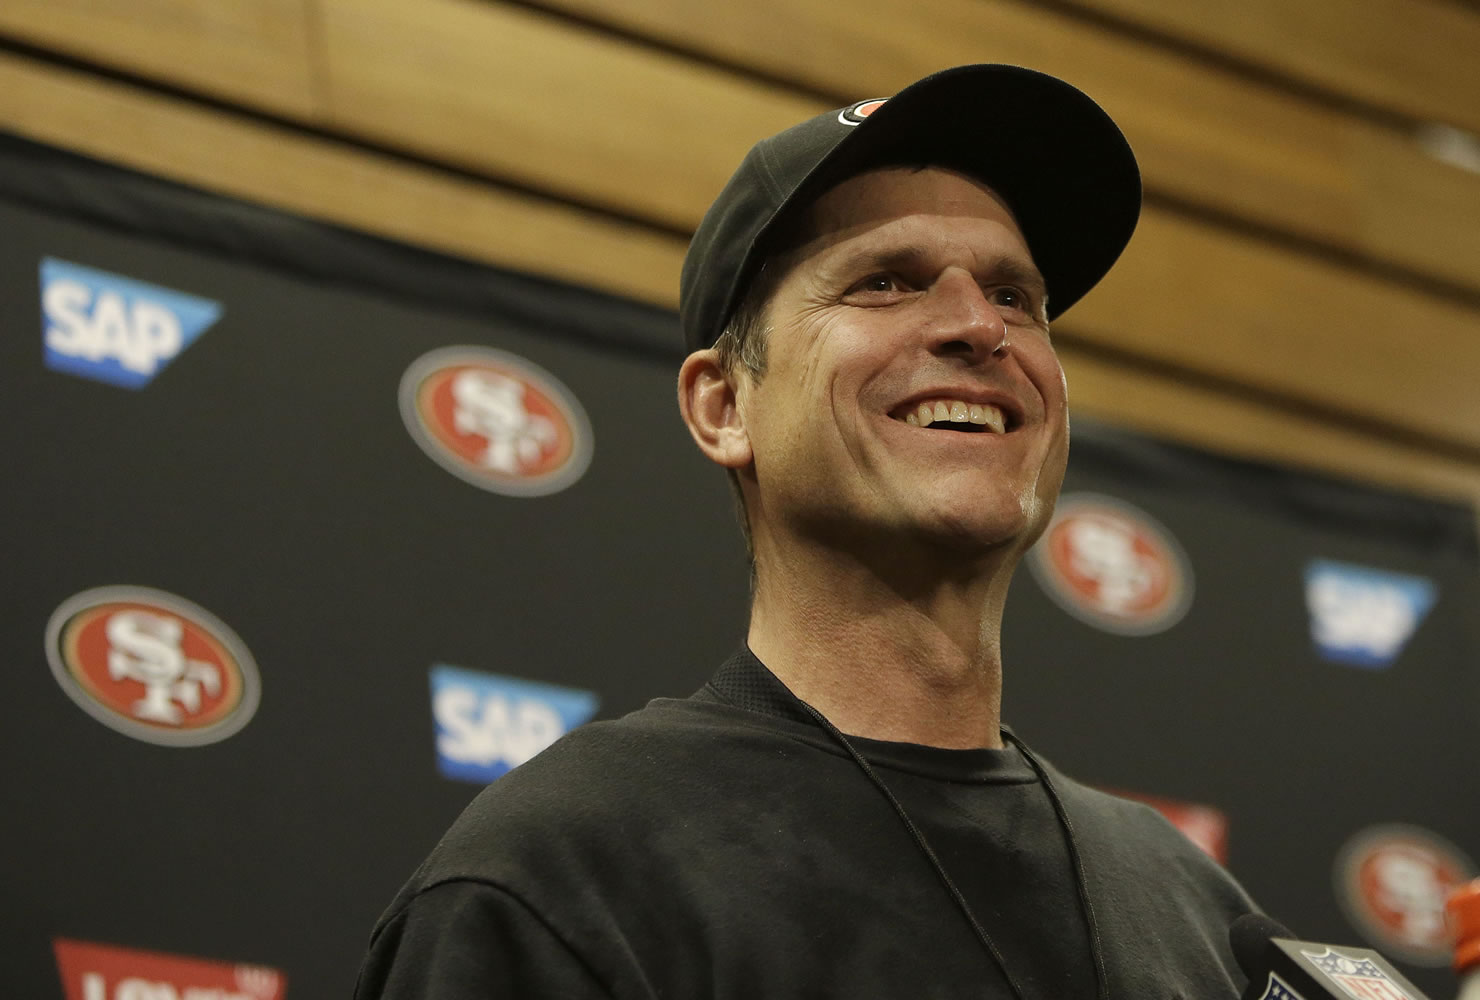 San Francisco 49ers head coach Jim Harbaugh speaks at a news conference after following Sunday's game against the Arizona Cardinals in Santa Clara, Calif., Sunday, Dec. 28, 2014.